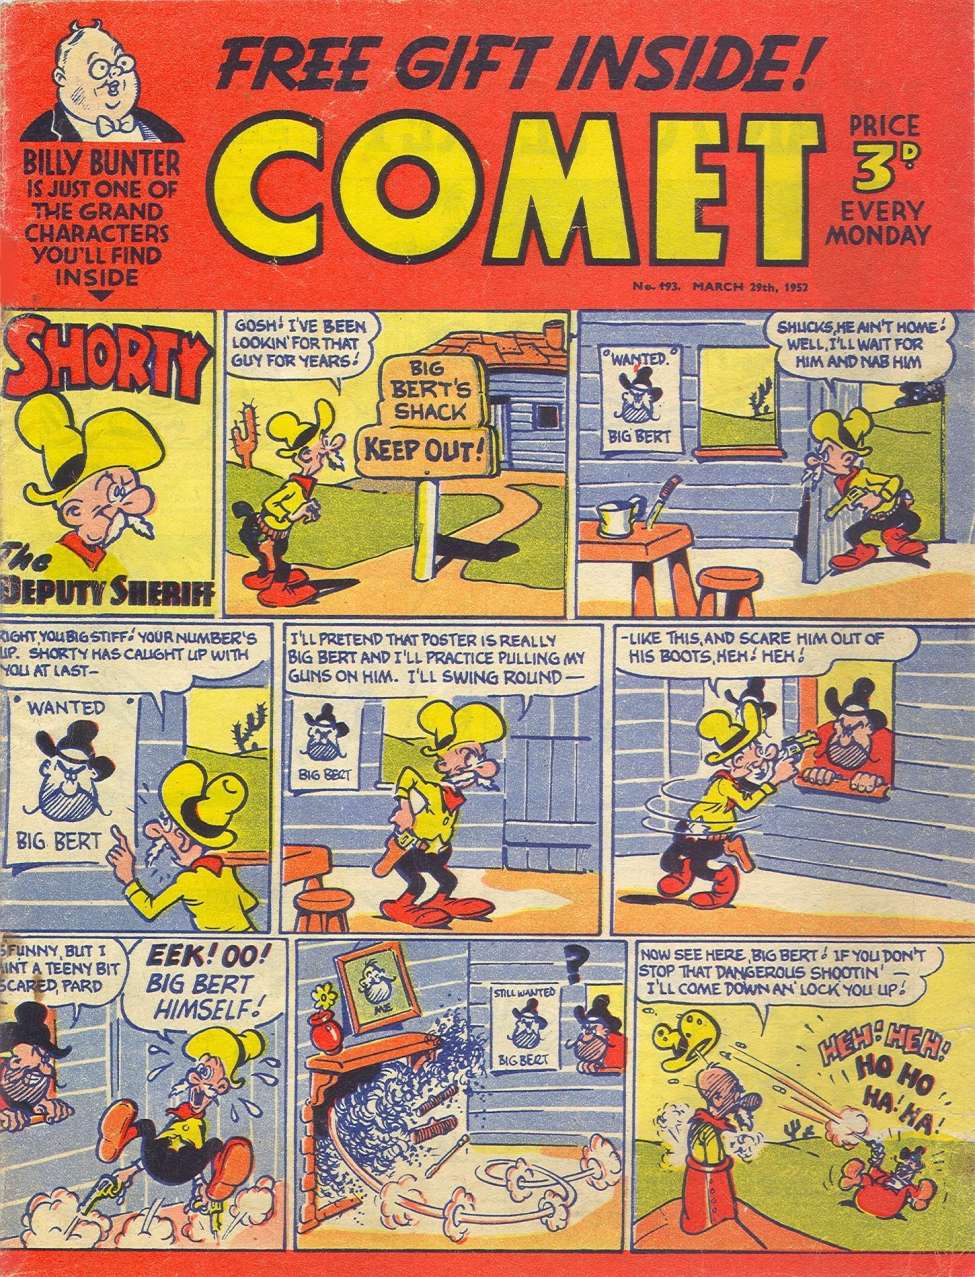 Book Cover For The Comet 193